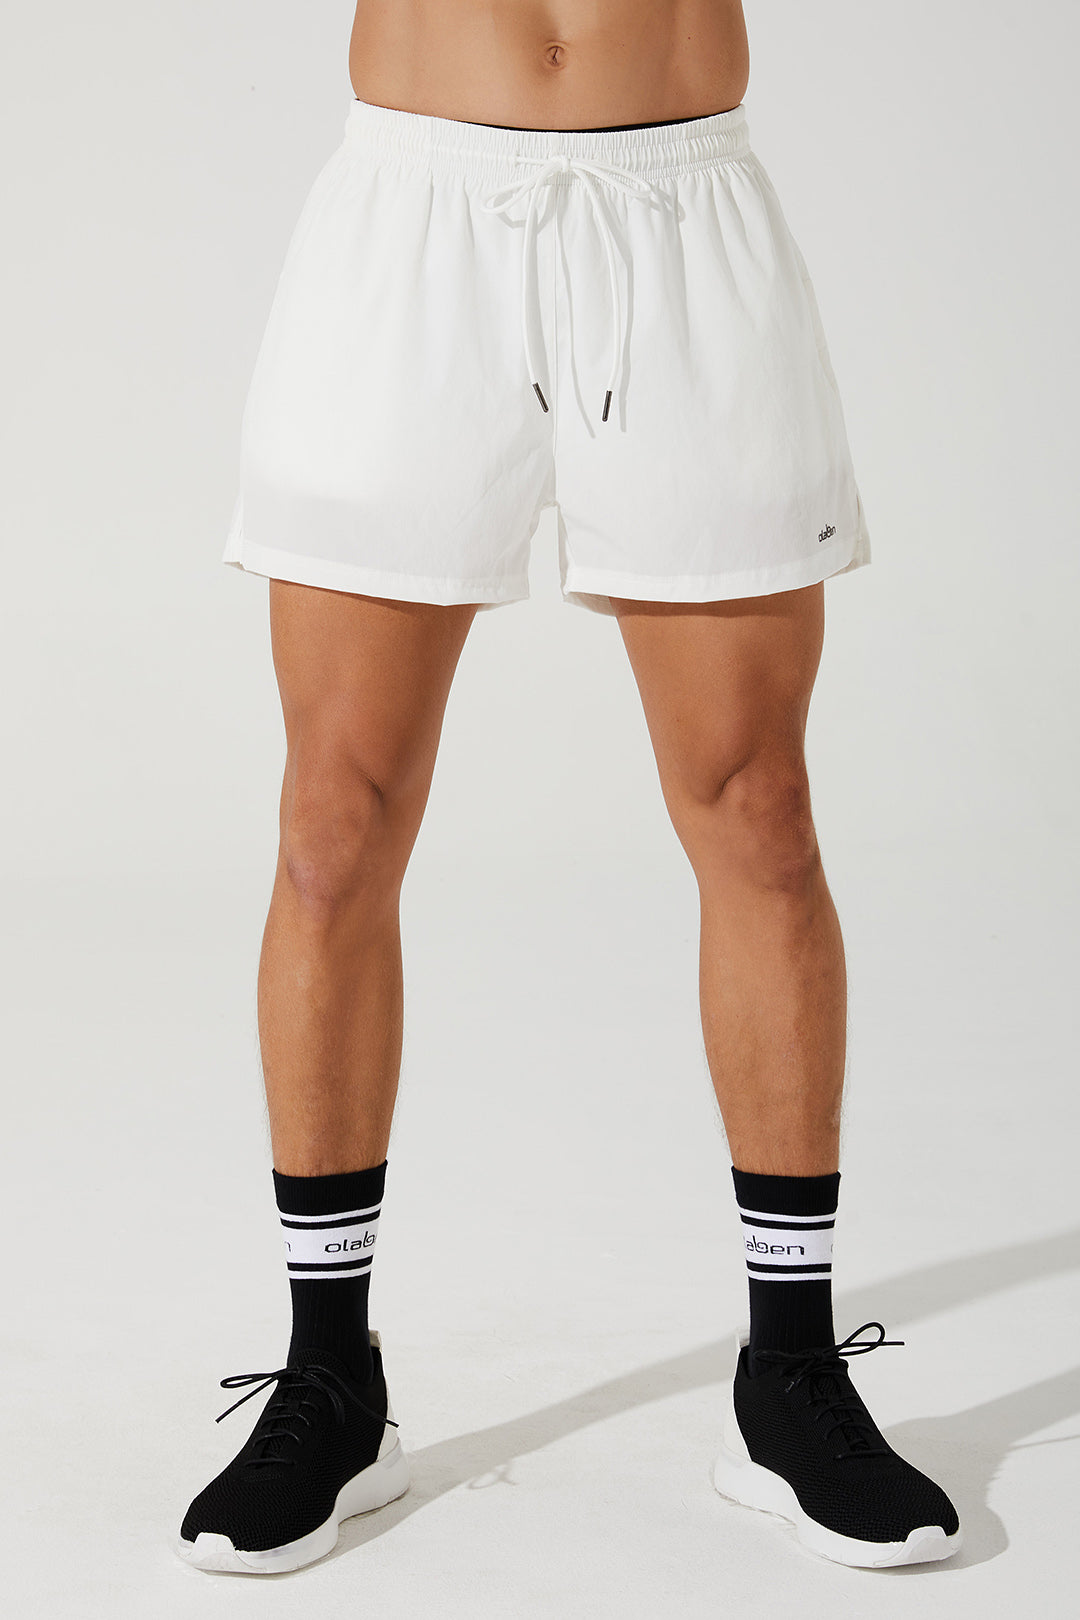 White running shorts for men, perfect for adapting to any workout. (Image: verney_5_adapt_running_short_mens_shorts_white_white_OW-0015-MSH-WT_2.jpg)